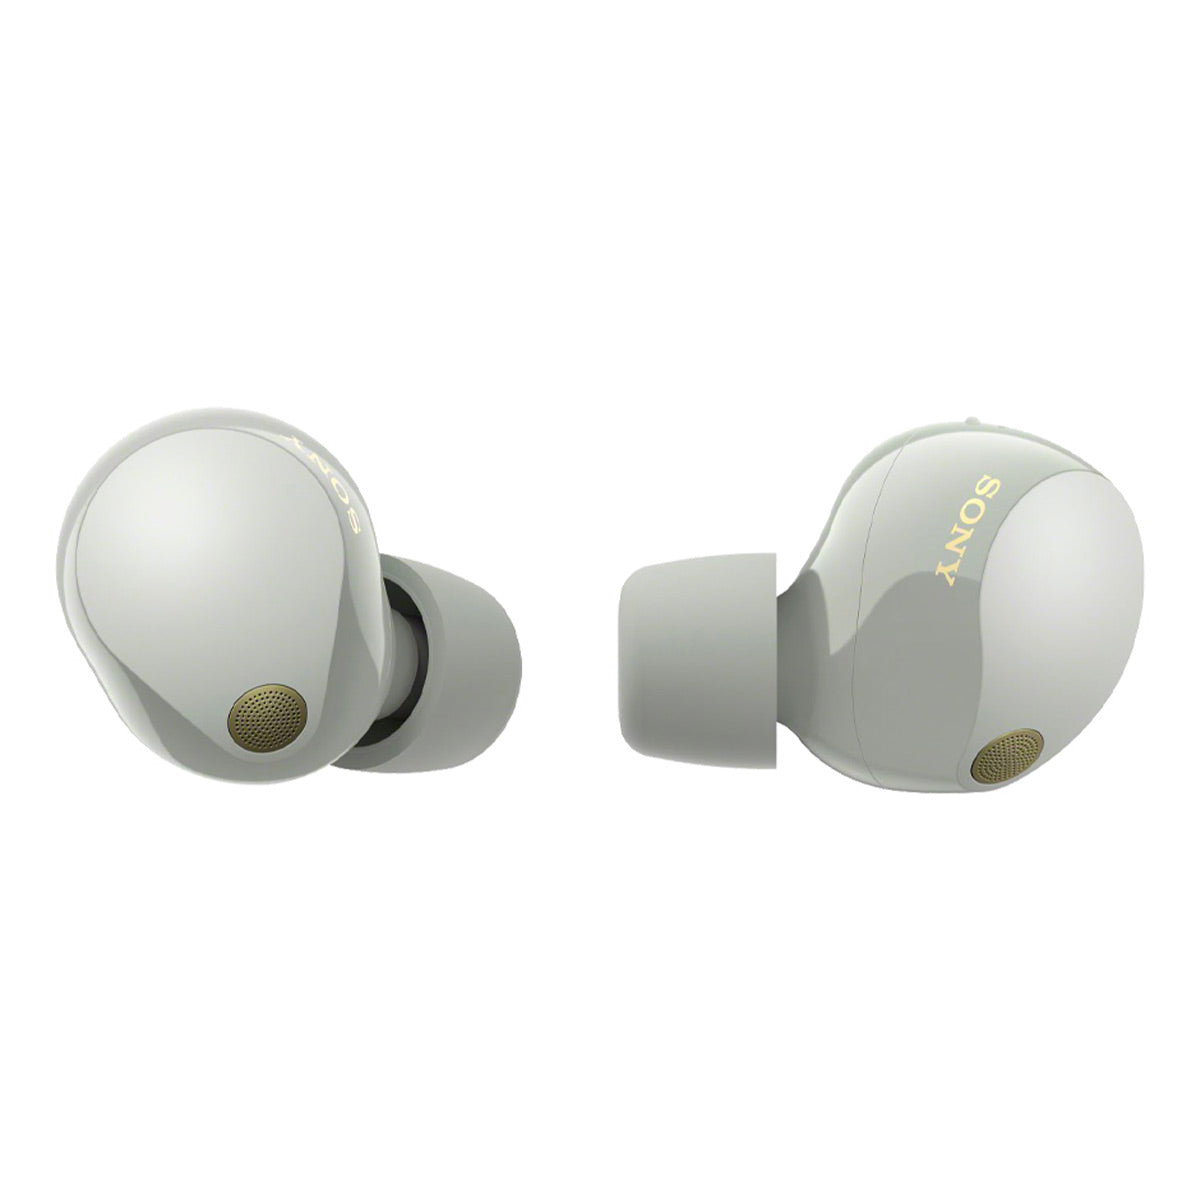 Sony WF-1000XM5 Truly Wireless Noise Canceling Earbud Headphones with